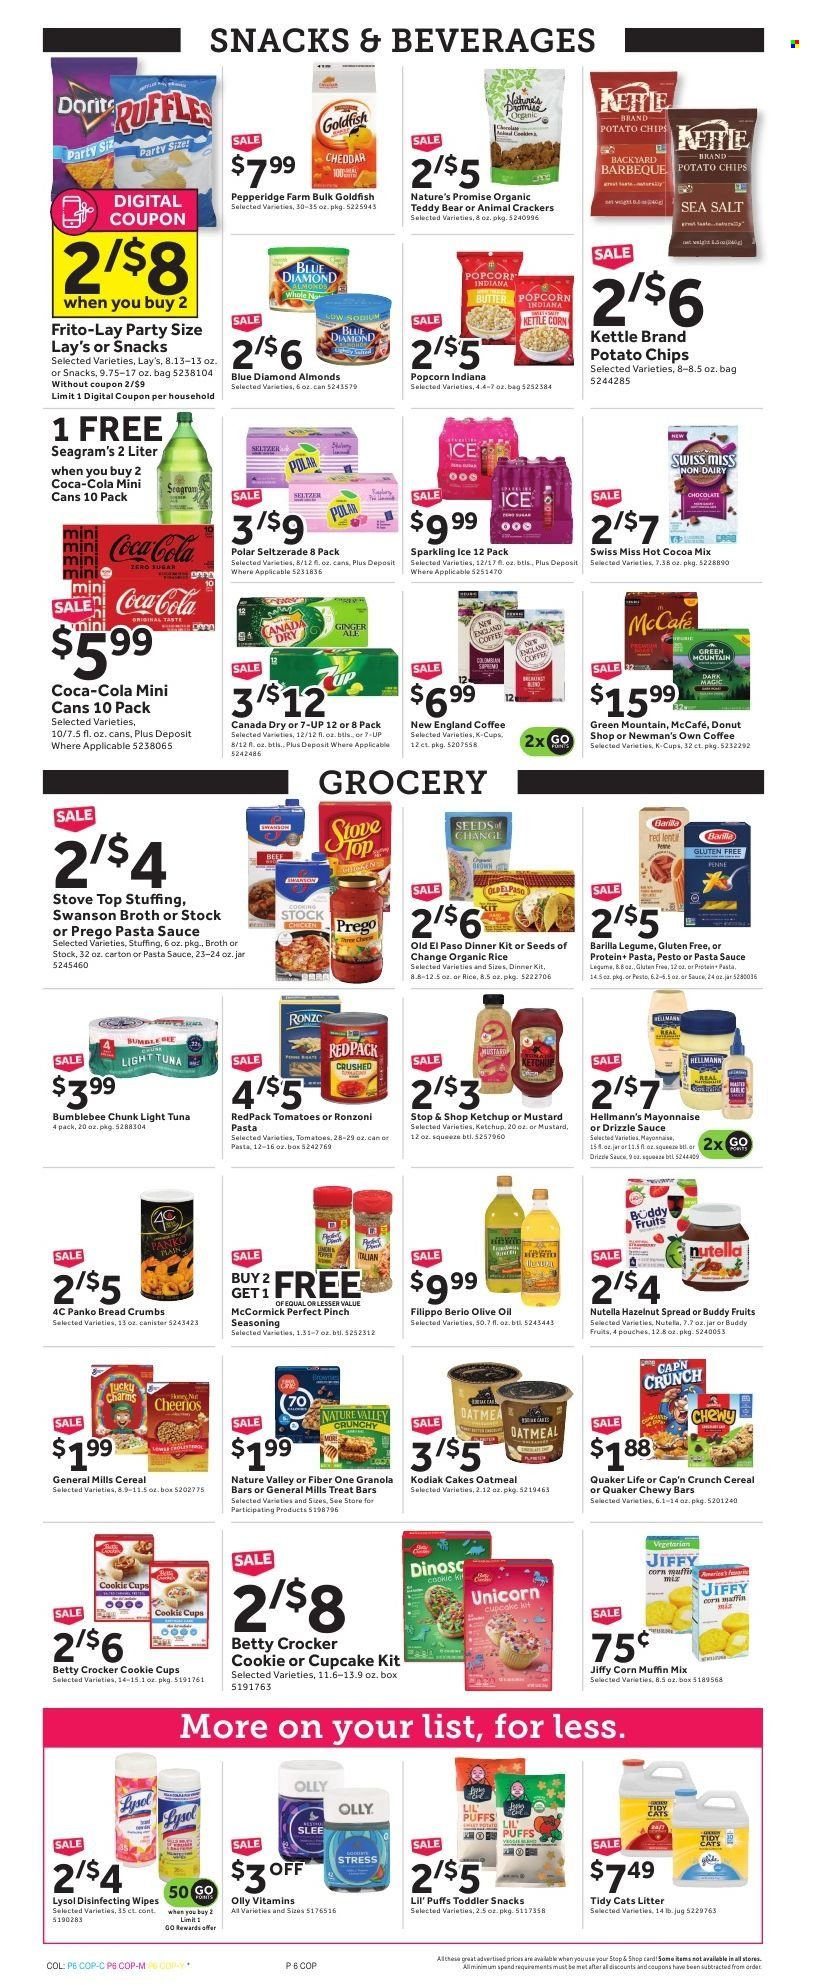 thumbnail - Stop & Shop Flyer - 01/21/2022 - 01/27/2022 - Sales products - Old El Paso, Nature’s Promise, puffs, breadcrumbs, panko breadcrumbs, muffin mix, corn, tuna, pasta sauce, dinner kit, Barilla, Quaker, cheese, Swiss Miss, butter, mayonnaise, Hellmann’s, Nutella, crackers, potato chips, chips, Lay’s, popcorn, Goldfish, Frito-Lay, oatmeal, broth, corn muffin, light tuna, cereals, Cheerios, granola bar, Cap'n Crunch, Nature Valley, Fiber One, spice, mustard, ketchup, pesto, olive oil, oil, hazelnut spread, almonds, Blue Diamond, Canada Dry, Coca-Cola, 7UP, hot cocoa, coffee, coffee capsules, McCafe, K-Cups, Green Mountain, wipes, cat litter, Jiffy. Page 6.